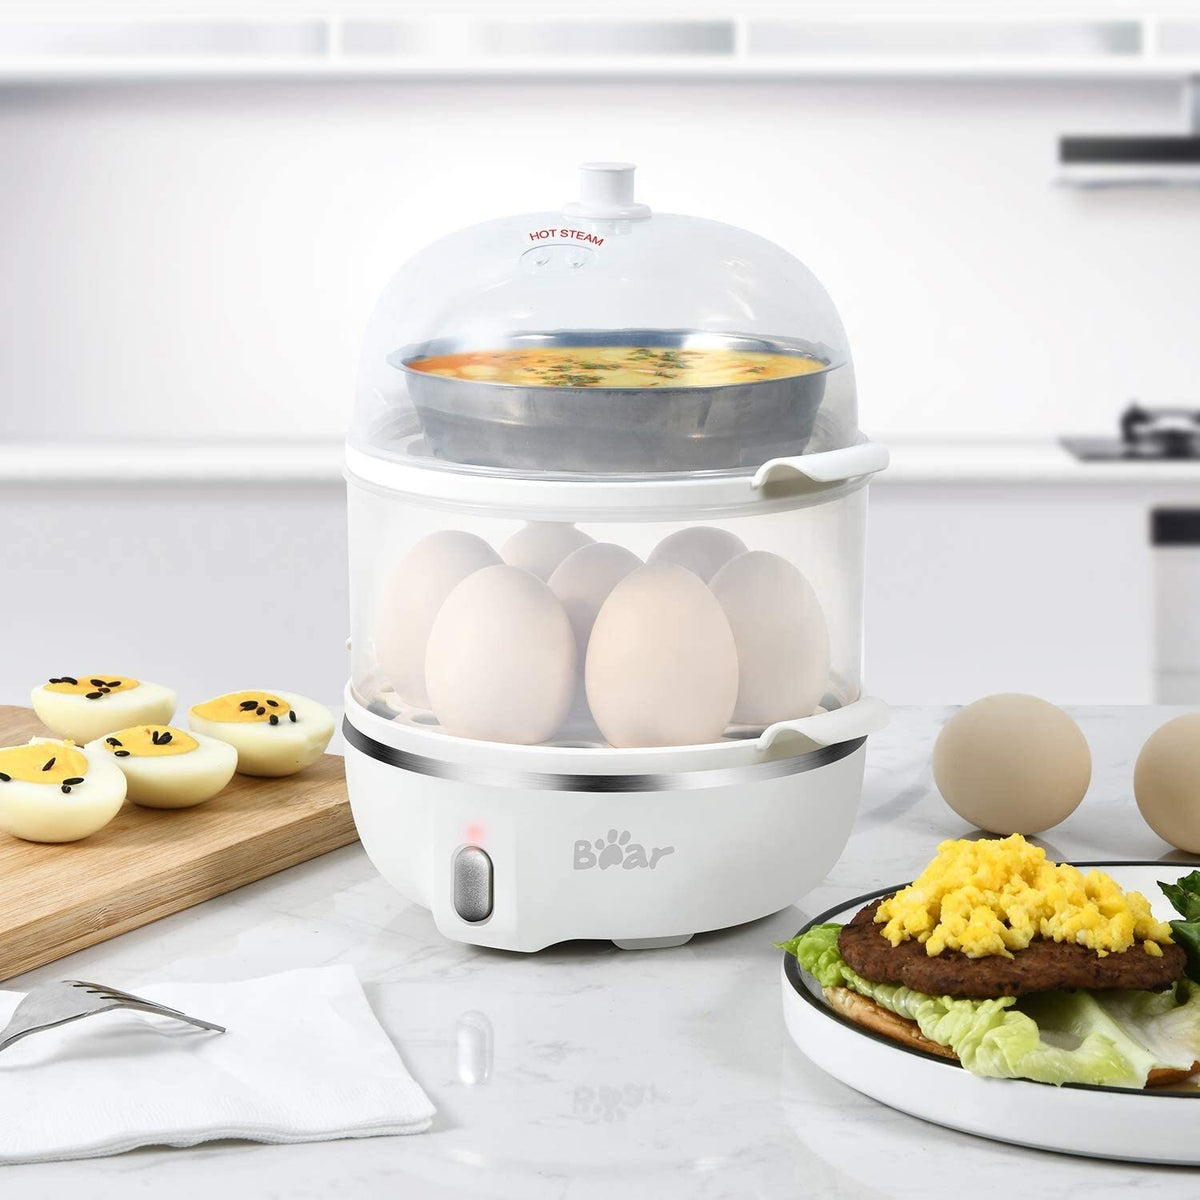 2 in 1 Electric Rapid Stainless 14 Egg Cooker/Steamer Auto Shut